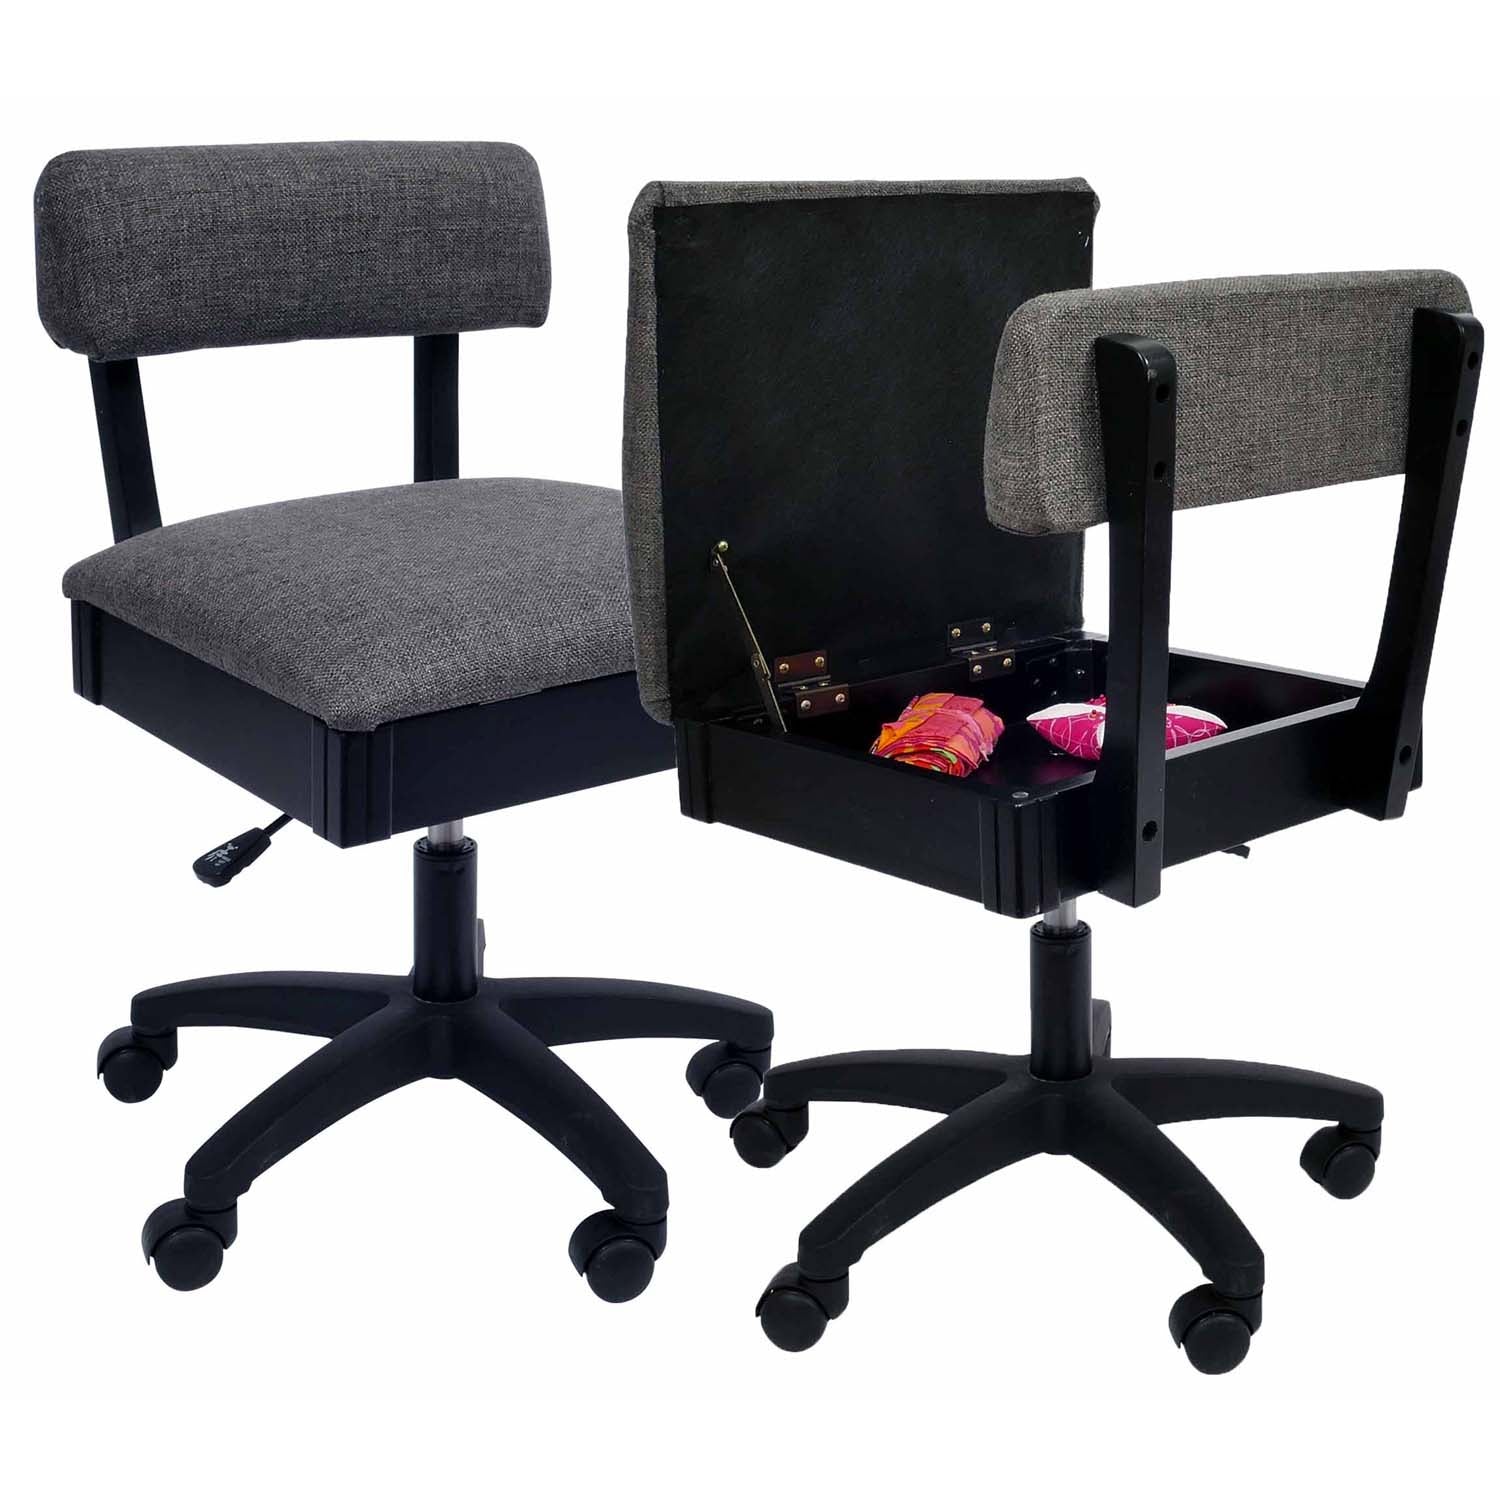 Adjustable Height Sewing Chair